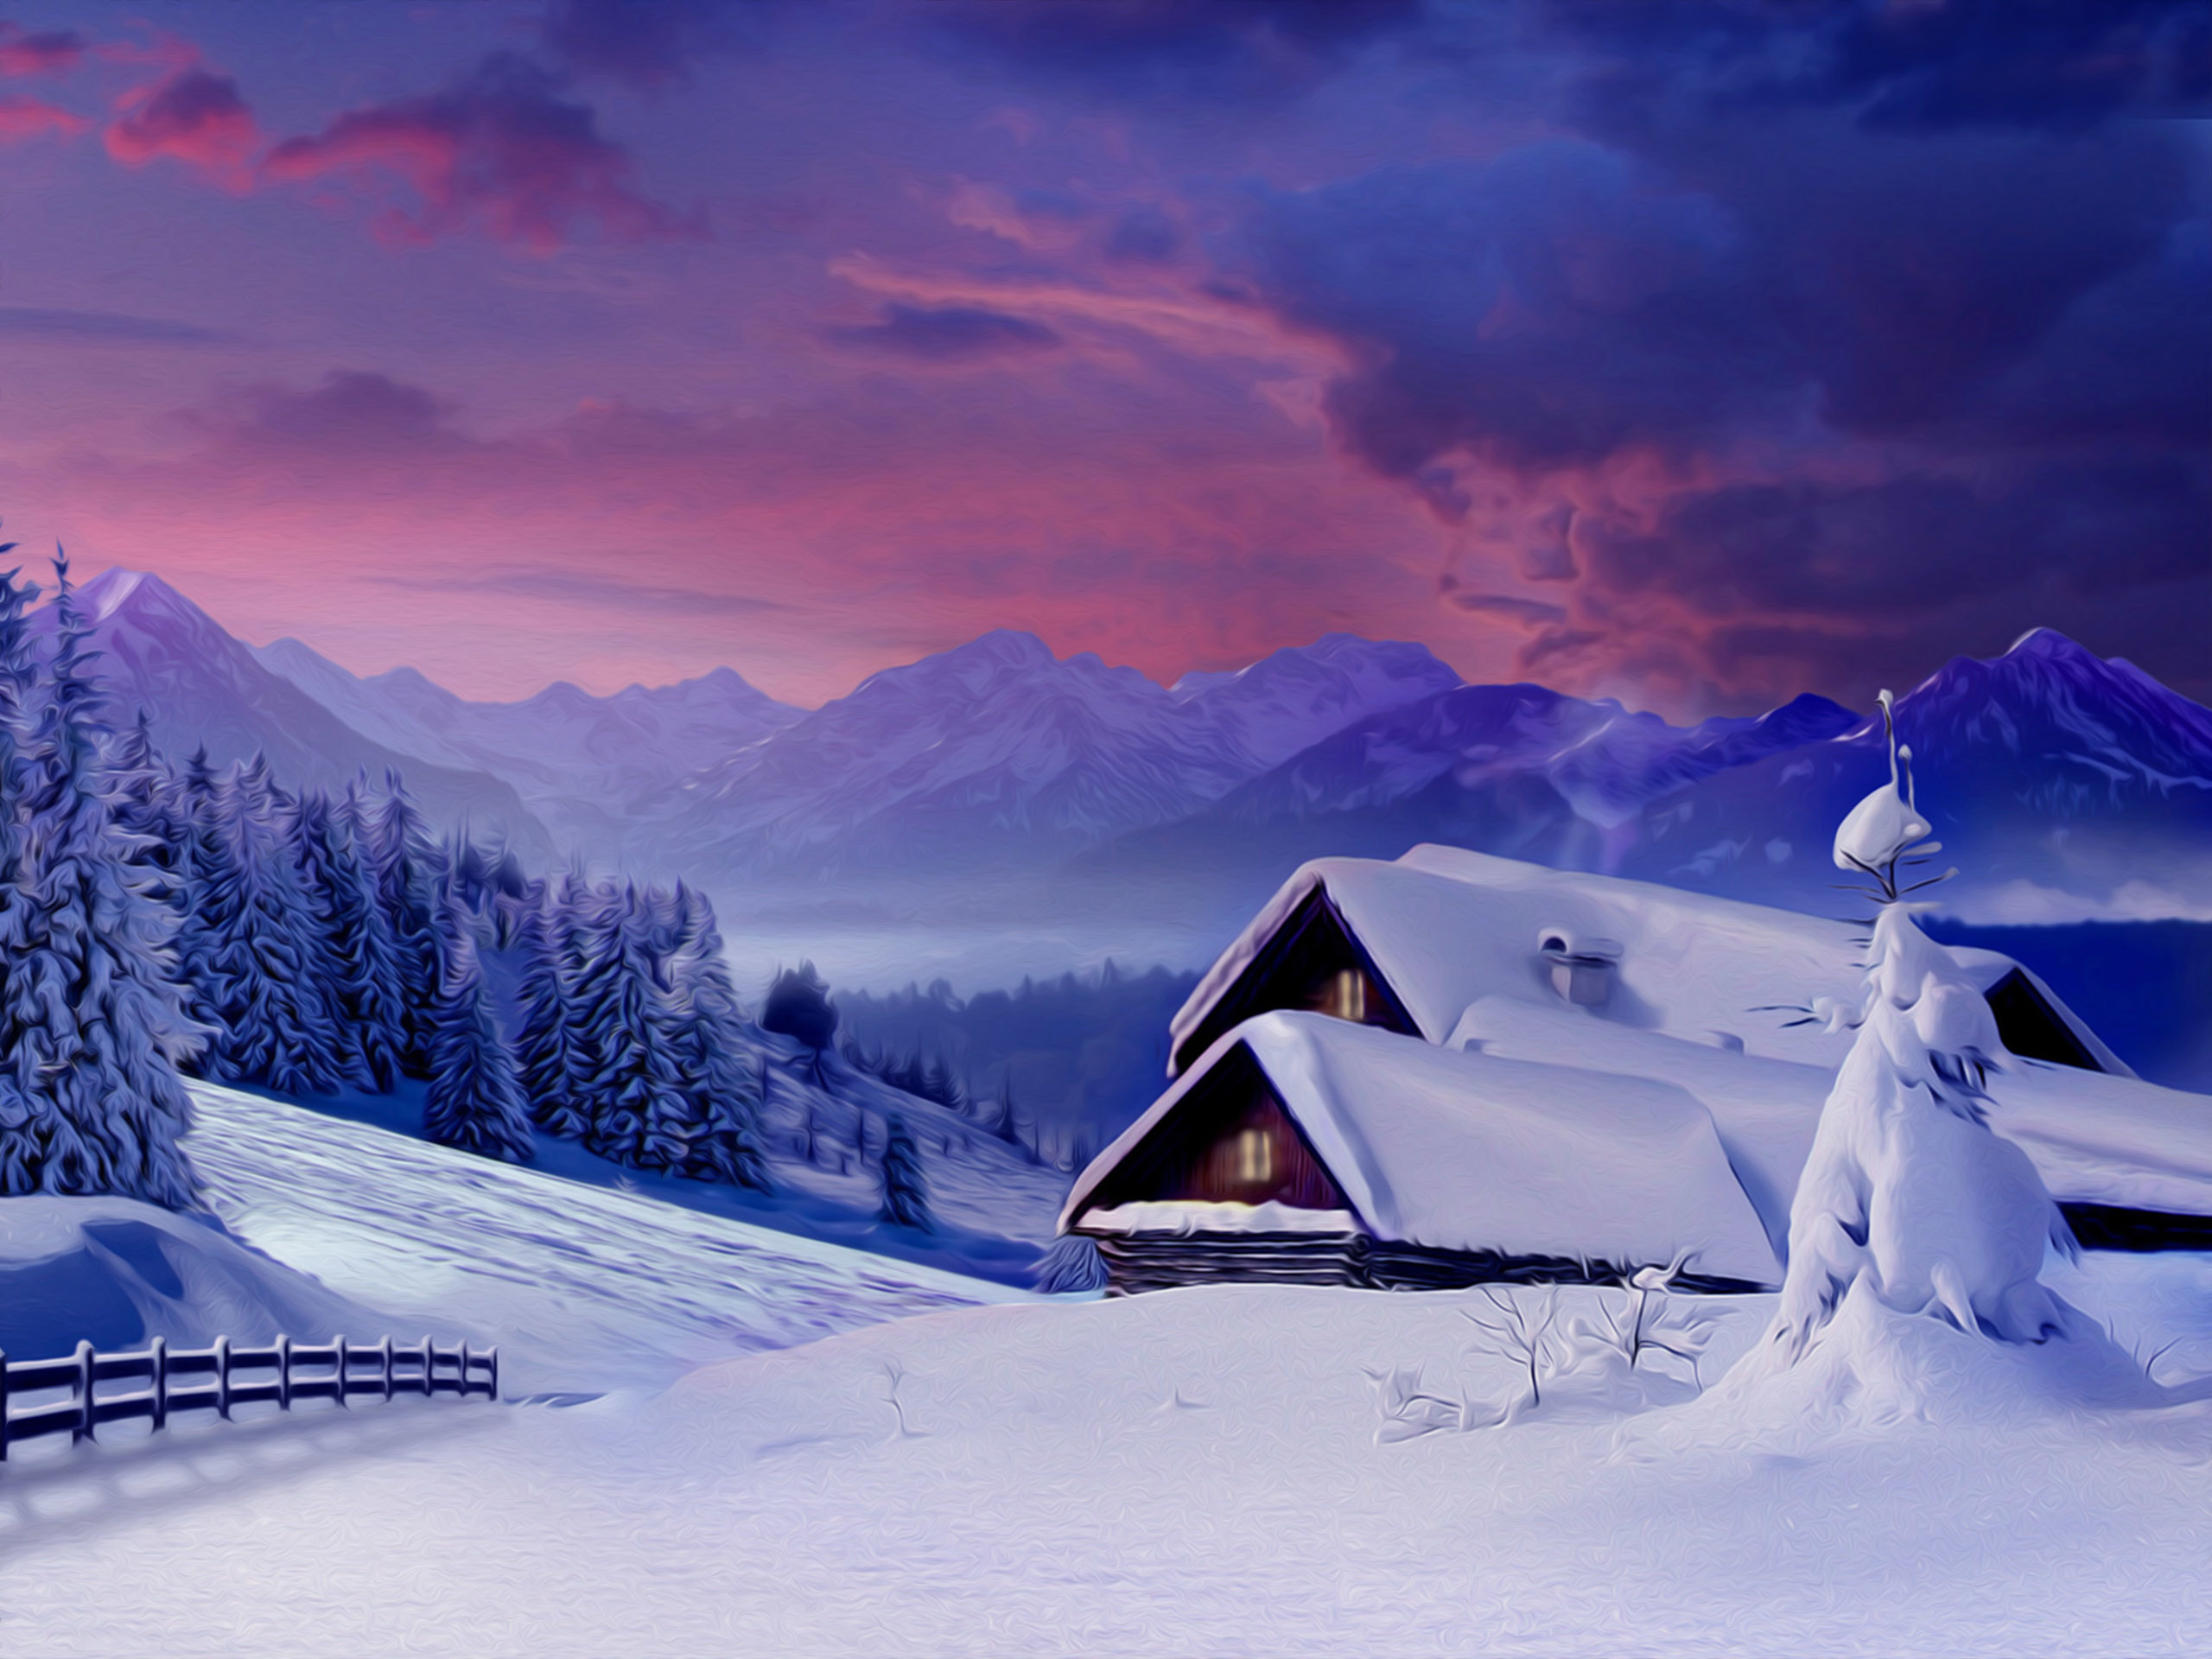 2560x1920 winter snow scene pictures | Snow Wallpapers | Desktop Wallpapers - Page 10